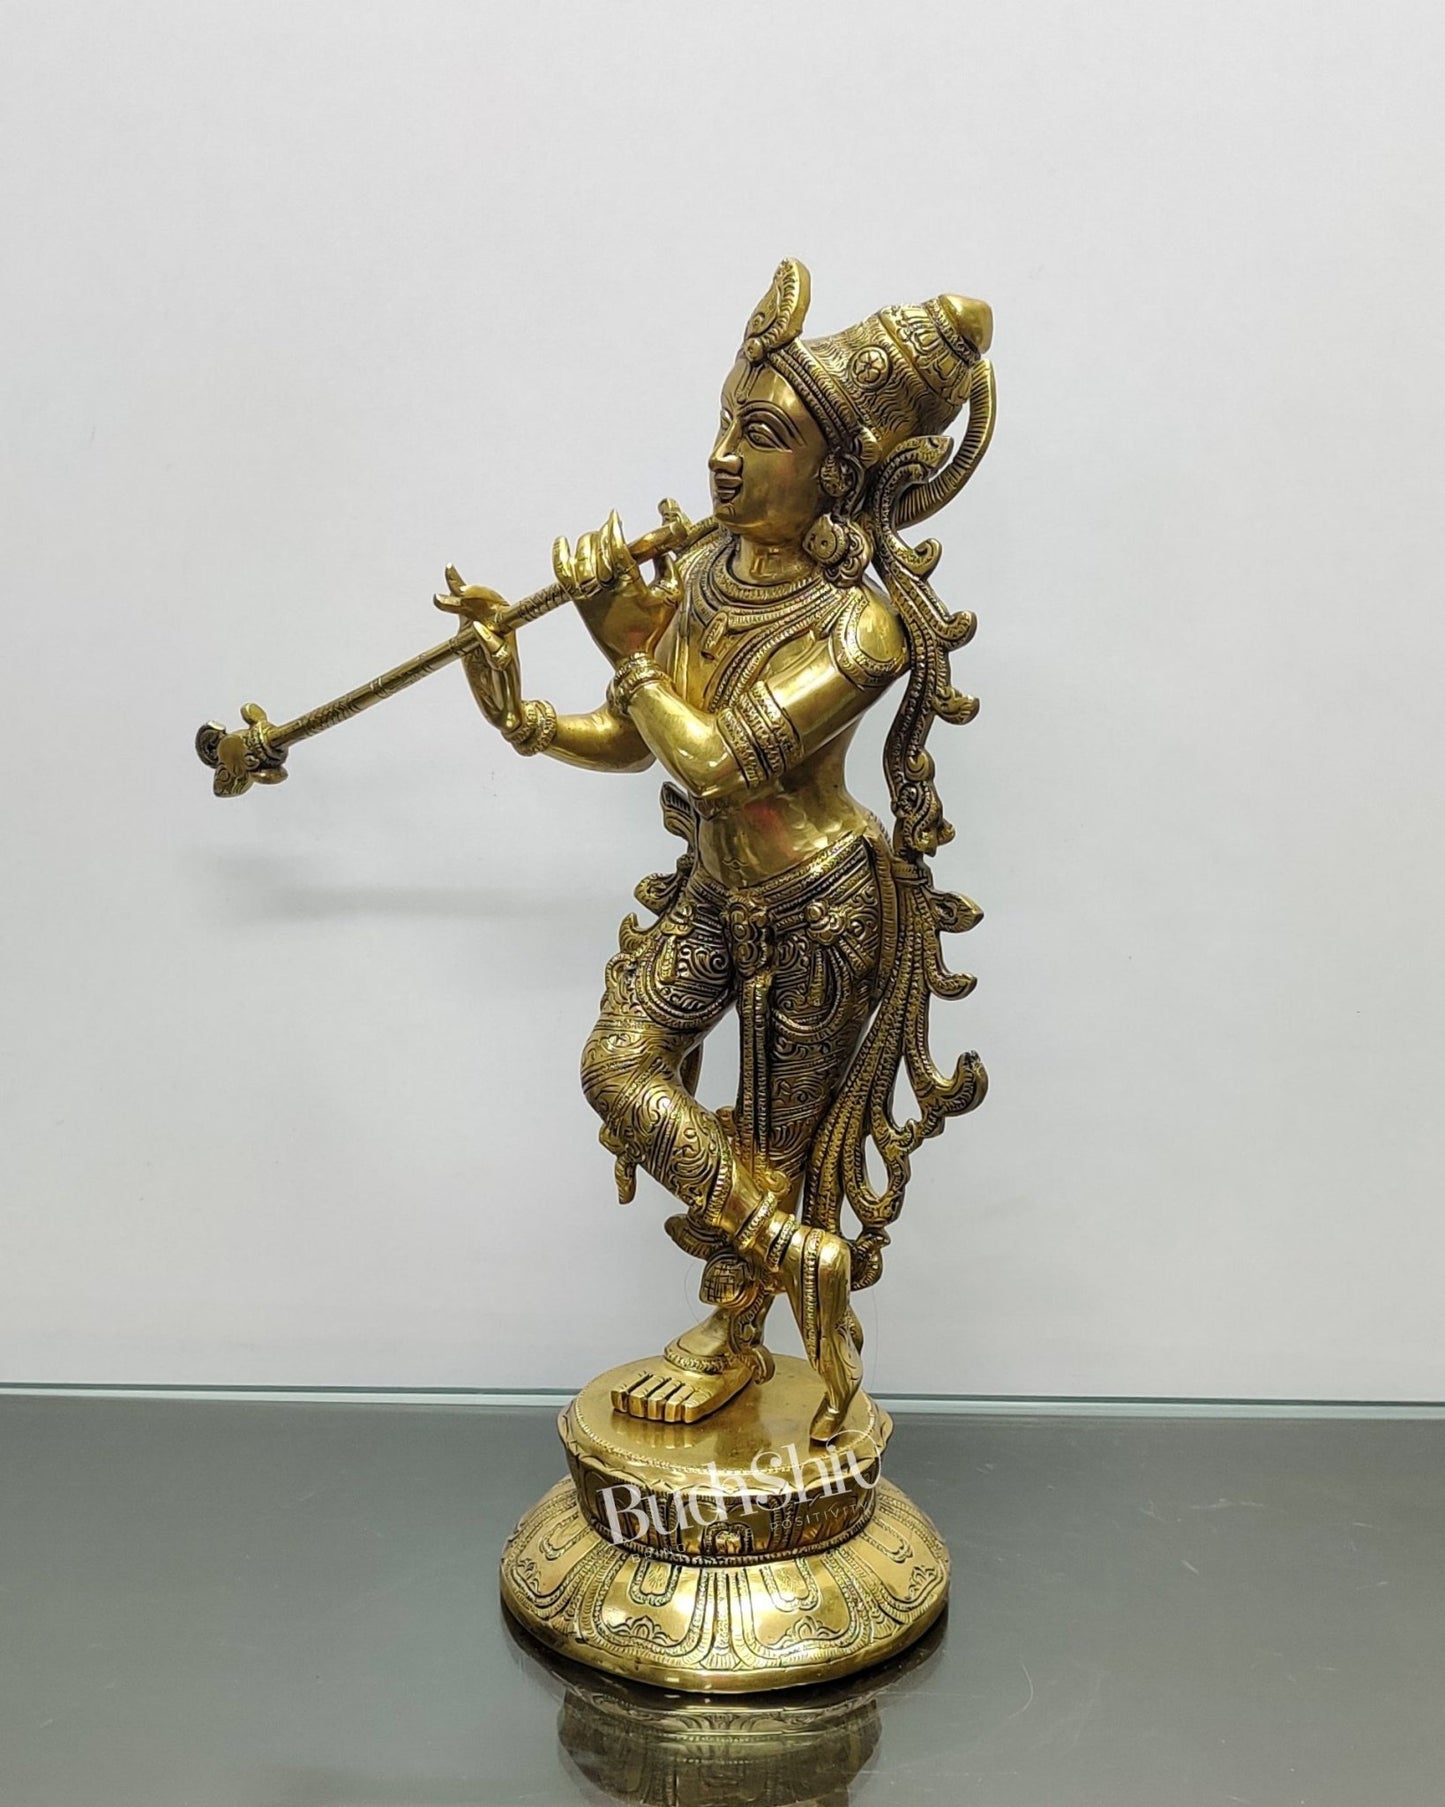 Pure Superfine Brass Very Unique South Indian Style Krishna Statue | Height 17 inches" - Budhshiv.com